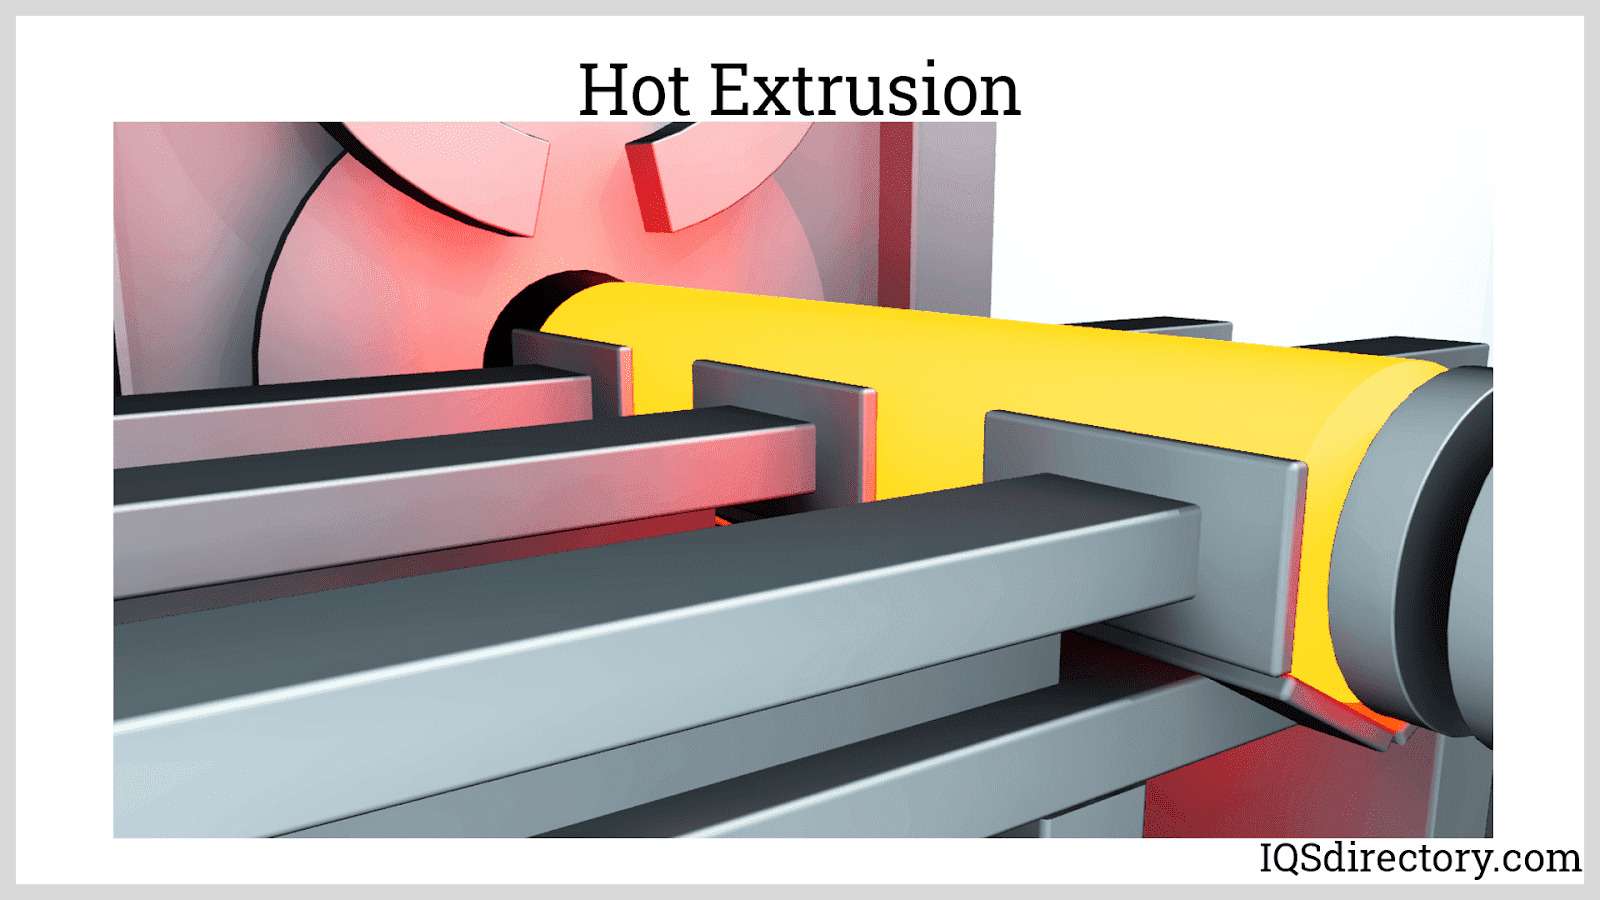 Hot Extrusion